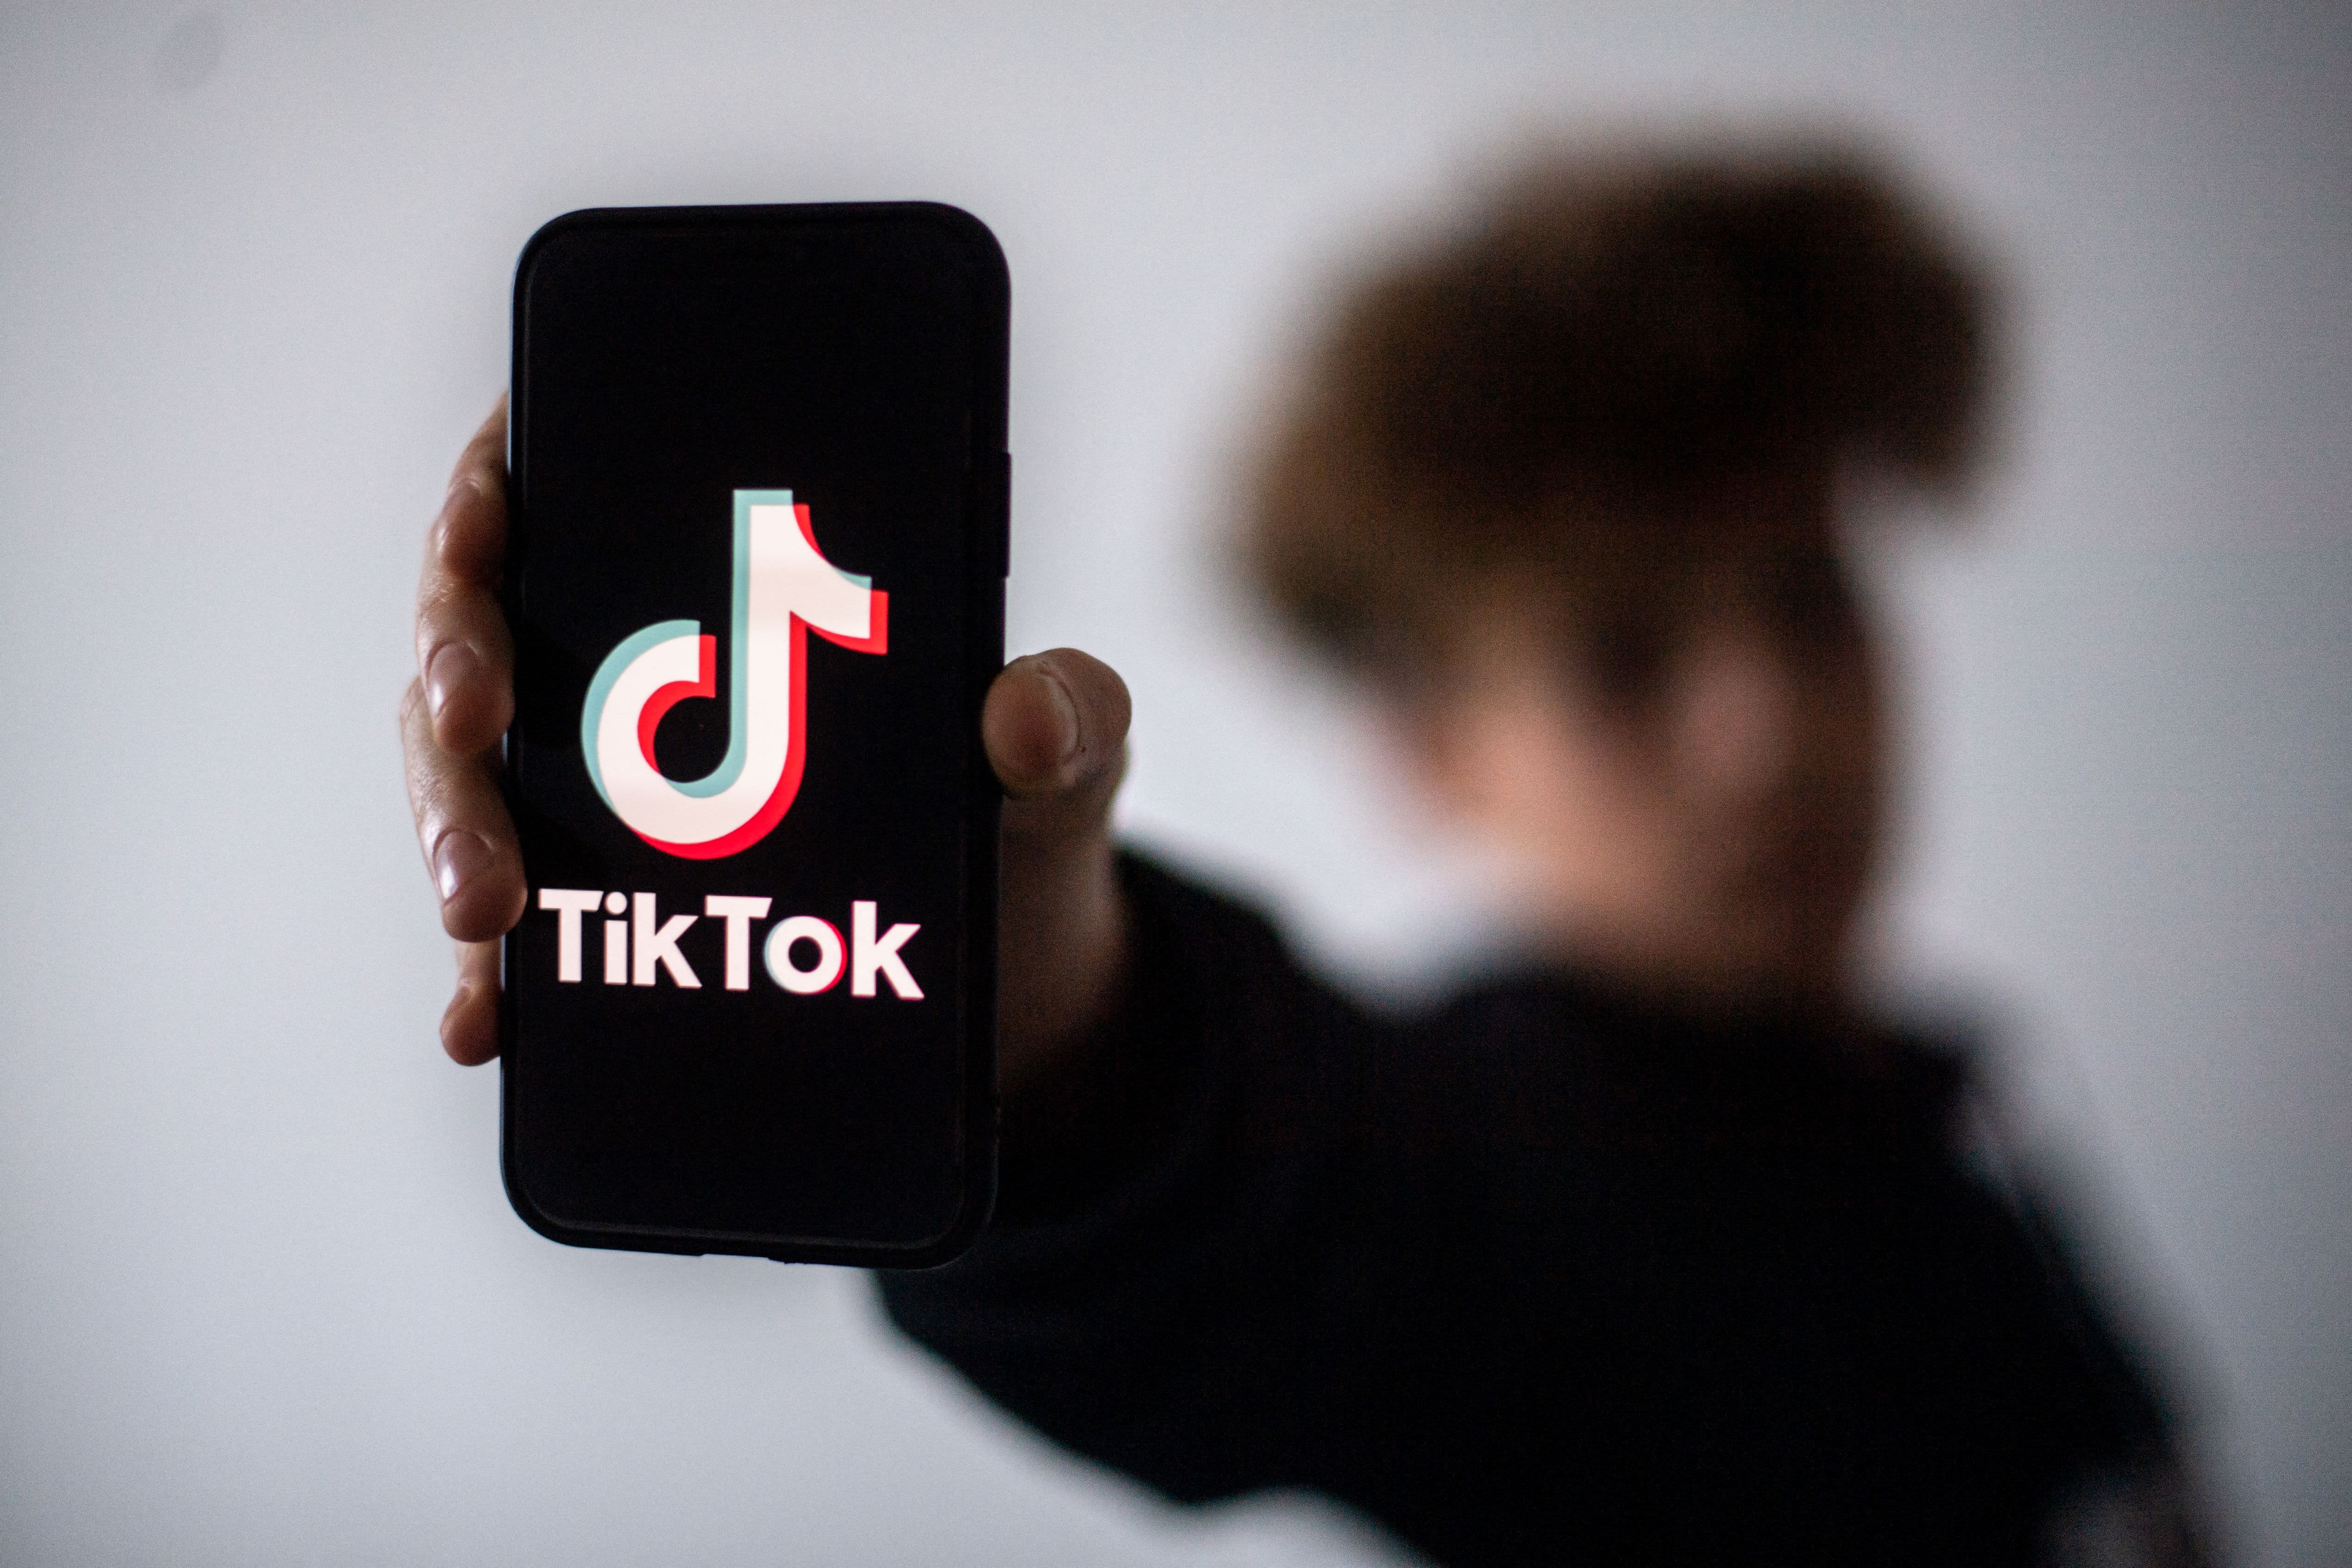 How TikTok influencers are helping companies recruit new workers